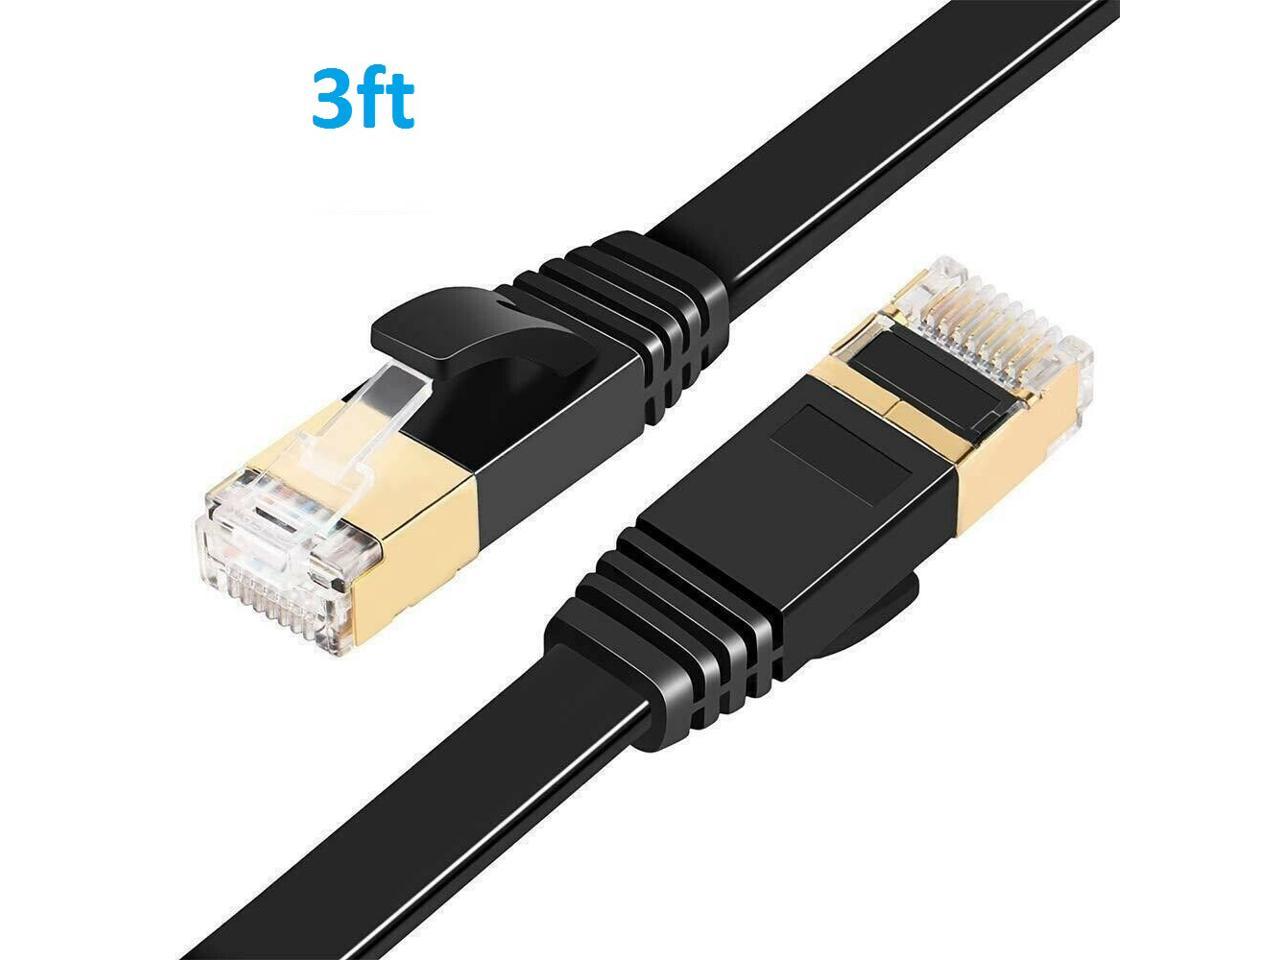 2 Pcs 3ft+6ft Flat Ethernet CAT7 Network Cable Patch Lead RJ45 for Smart TV/PS4/Xbox 